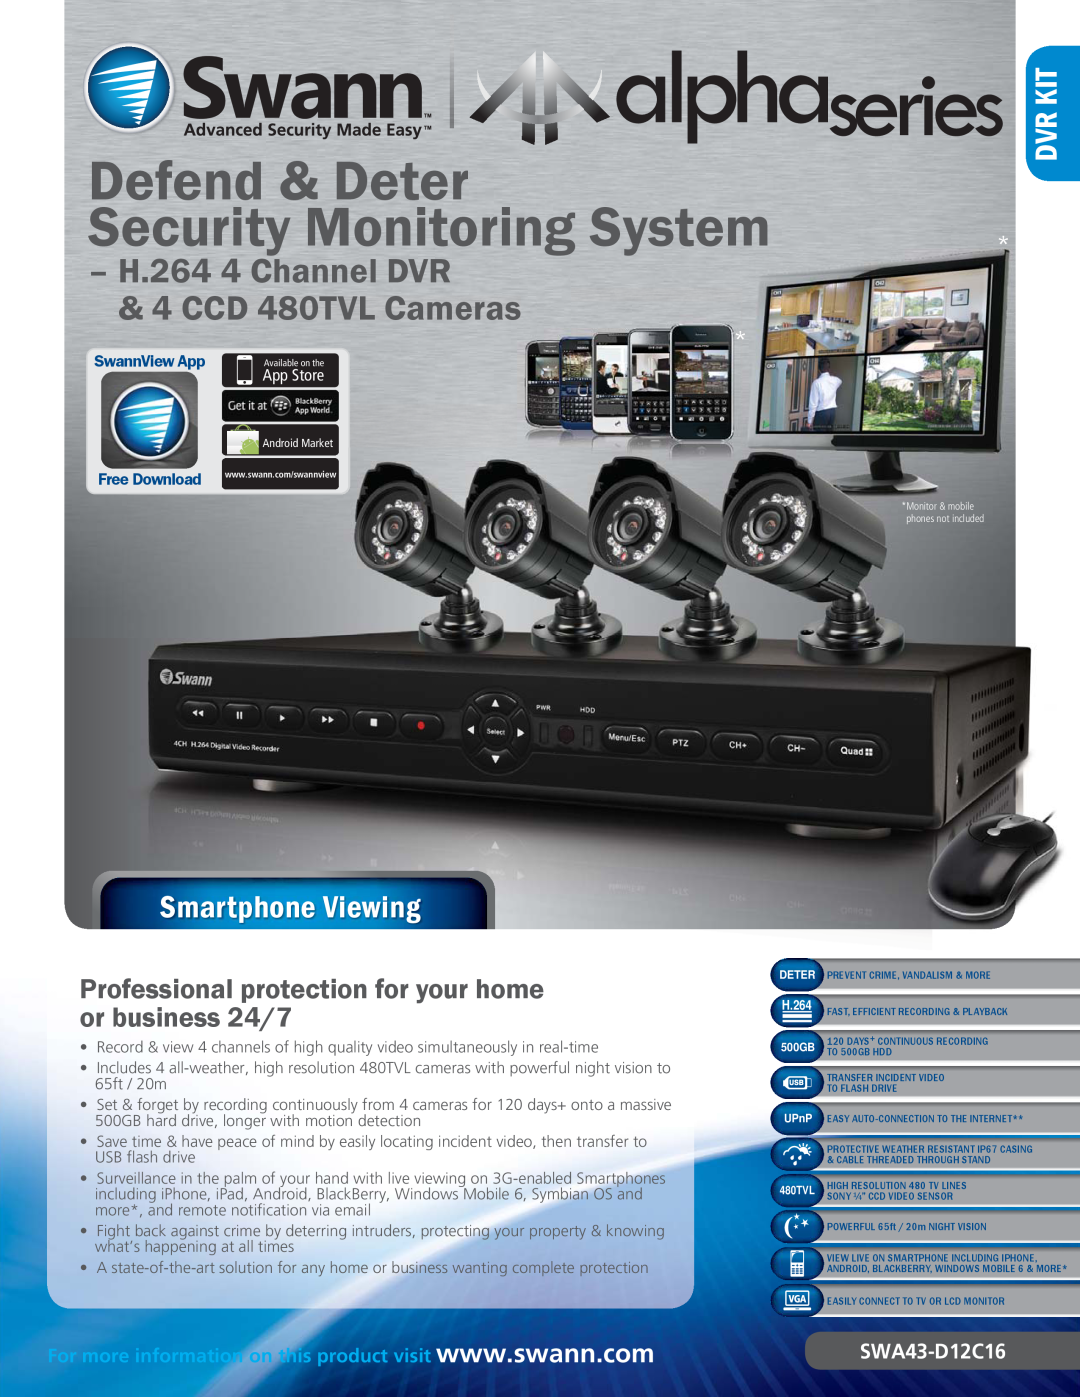 Swann SWA43-D12C16 manual App Store, Defend & Deter Security Monitoring System, H.264 4 Channel DVR & 4 CCD 480TVL Cameras 